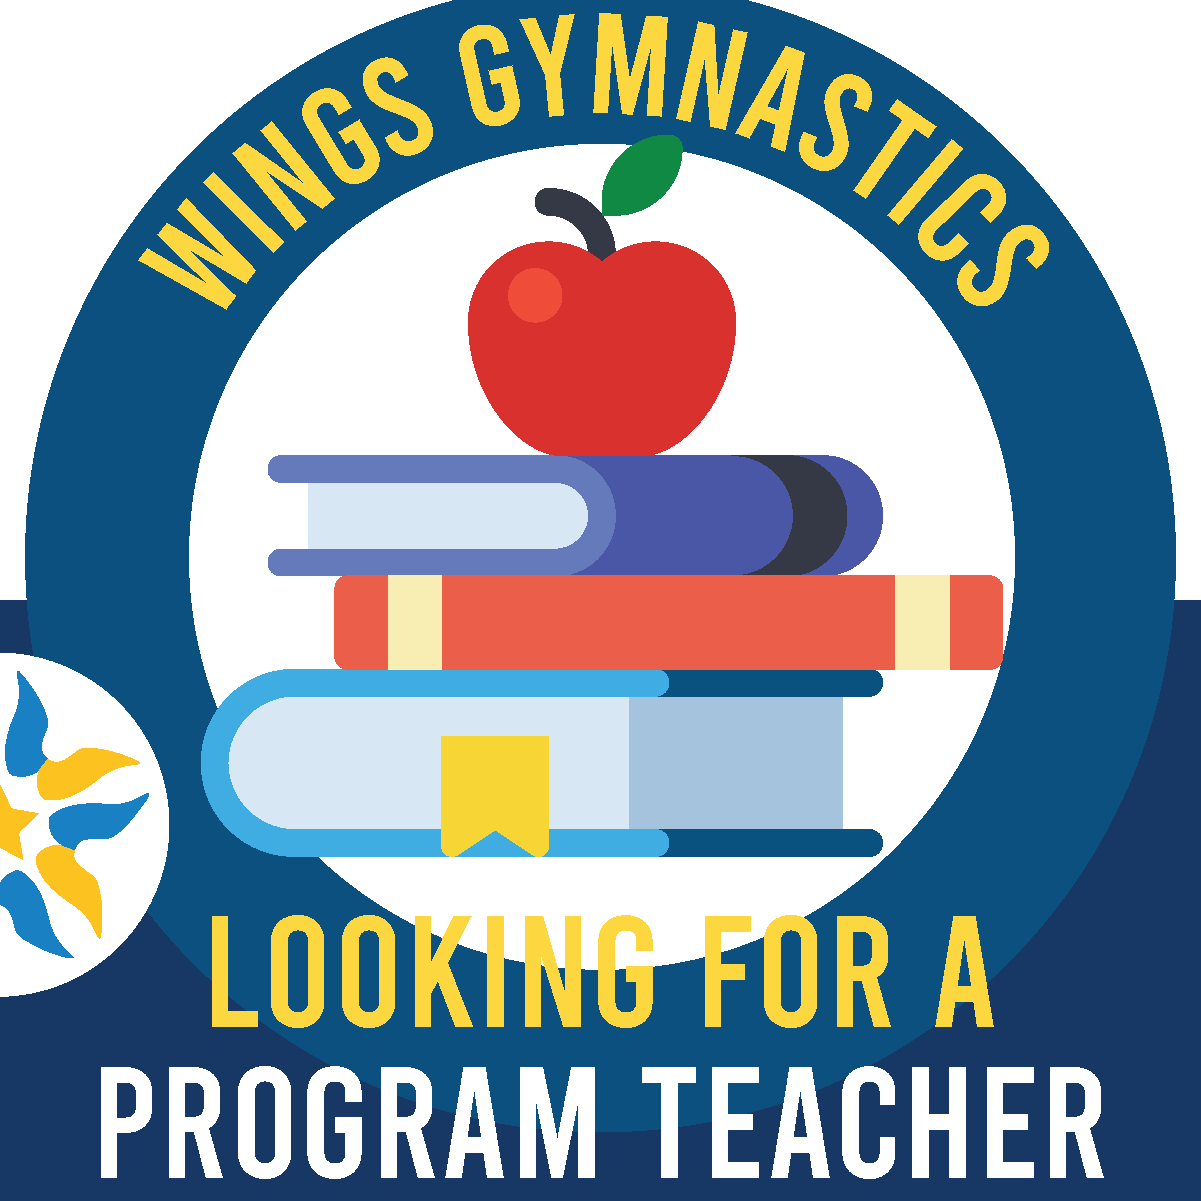 Wings is looking for a program teacher for our care program. Apply today!